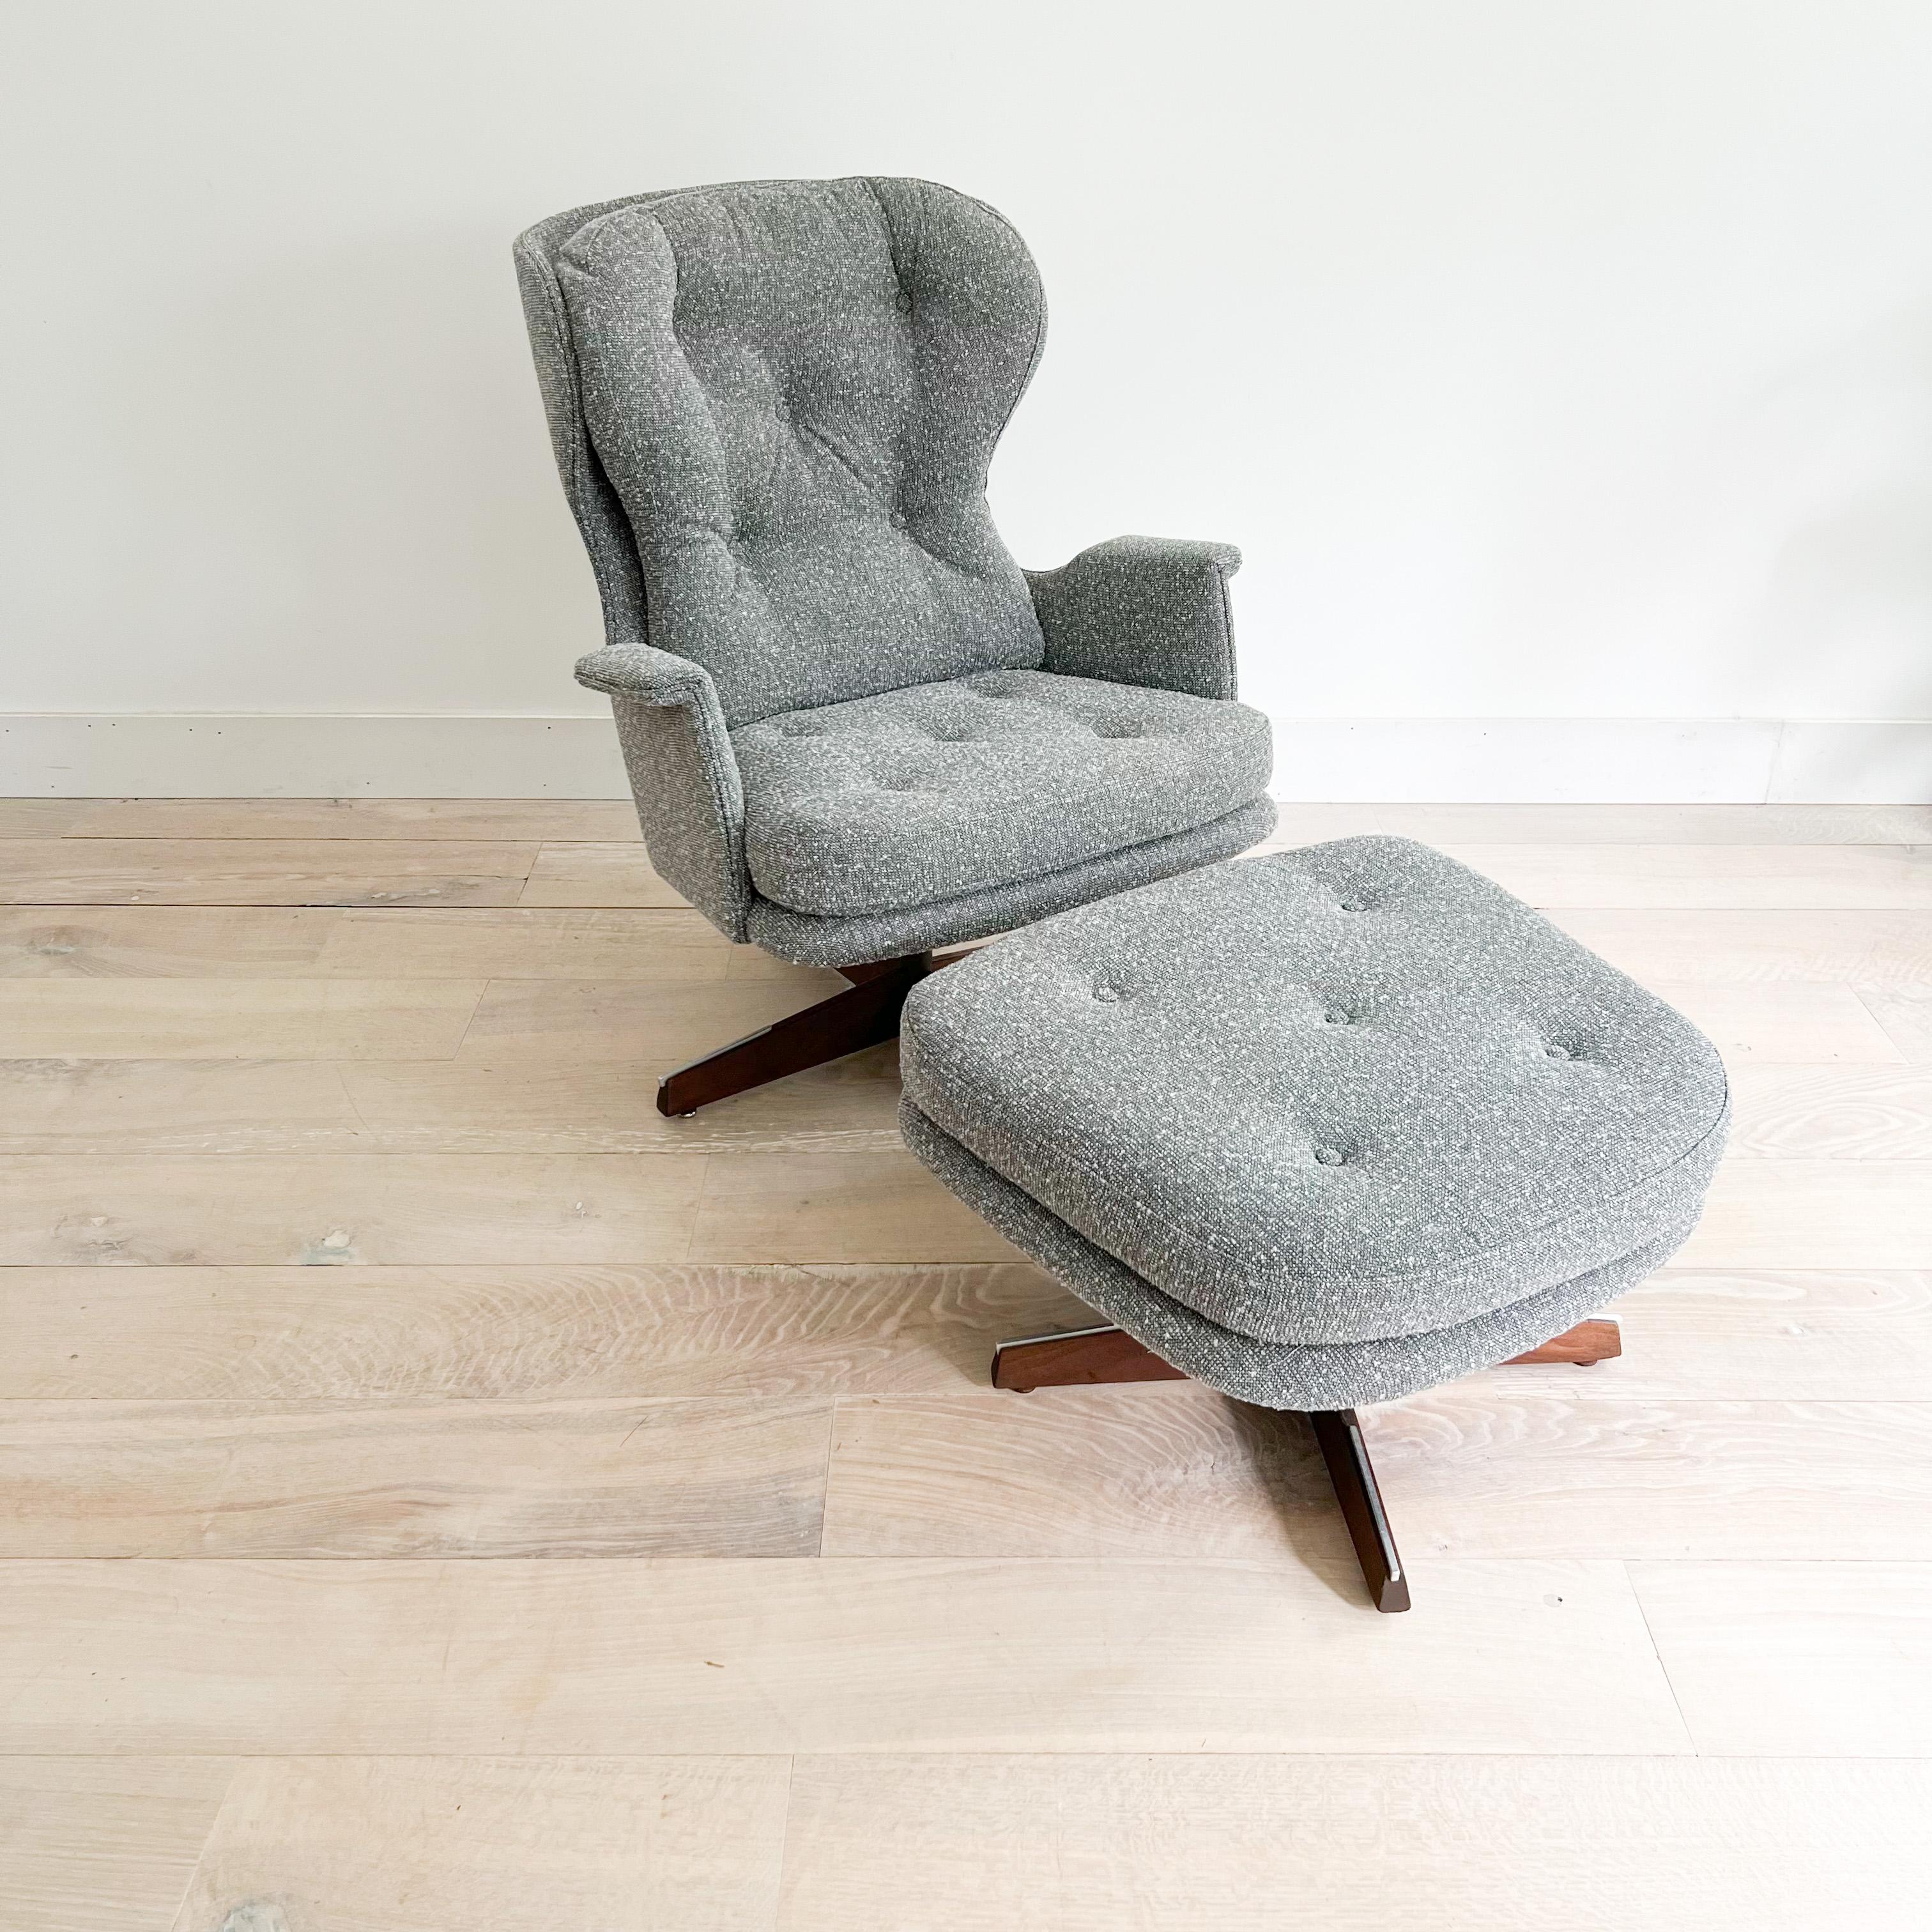 Mid century modern swivel rocker lounge chair with ottoman. New grey tweed upholstery. The wooden bases have some scuffing/scratching from age appropriate wear. The previous owner did a repair to a crack in one of the ottoman legs (see